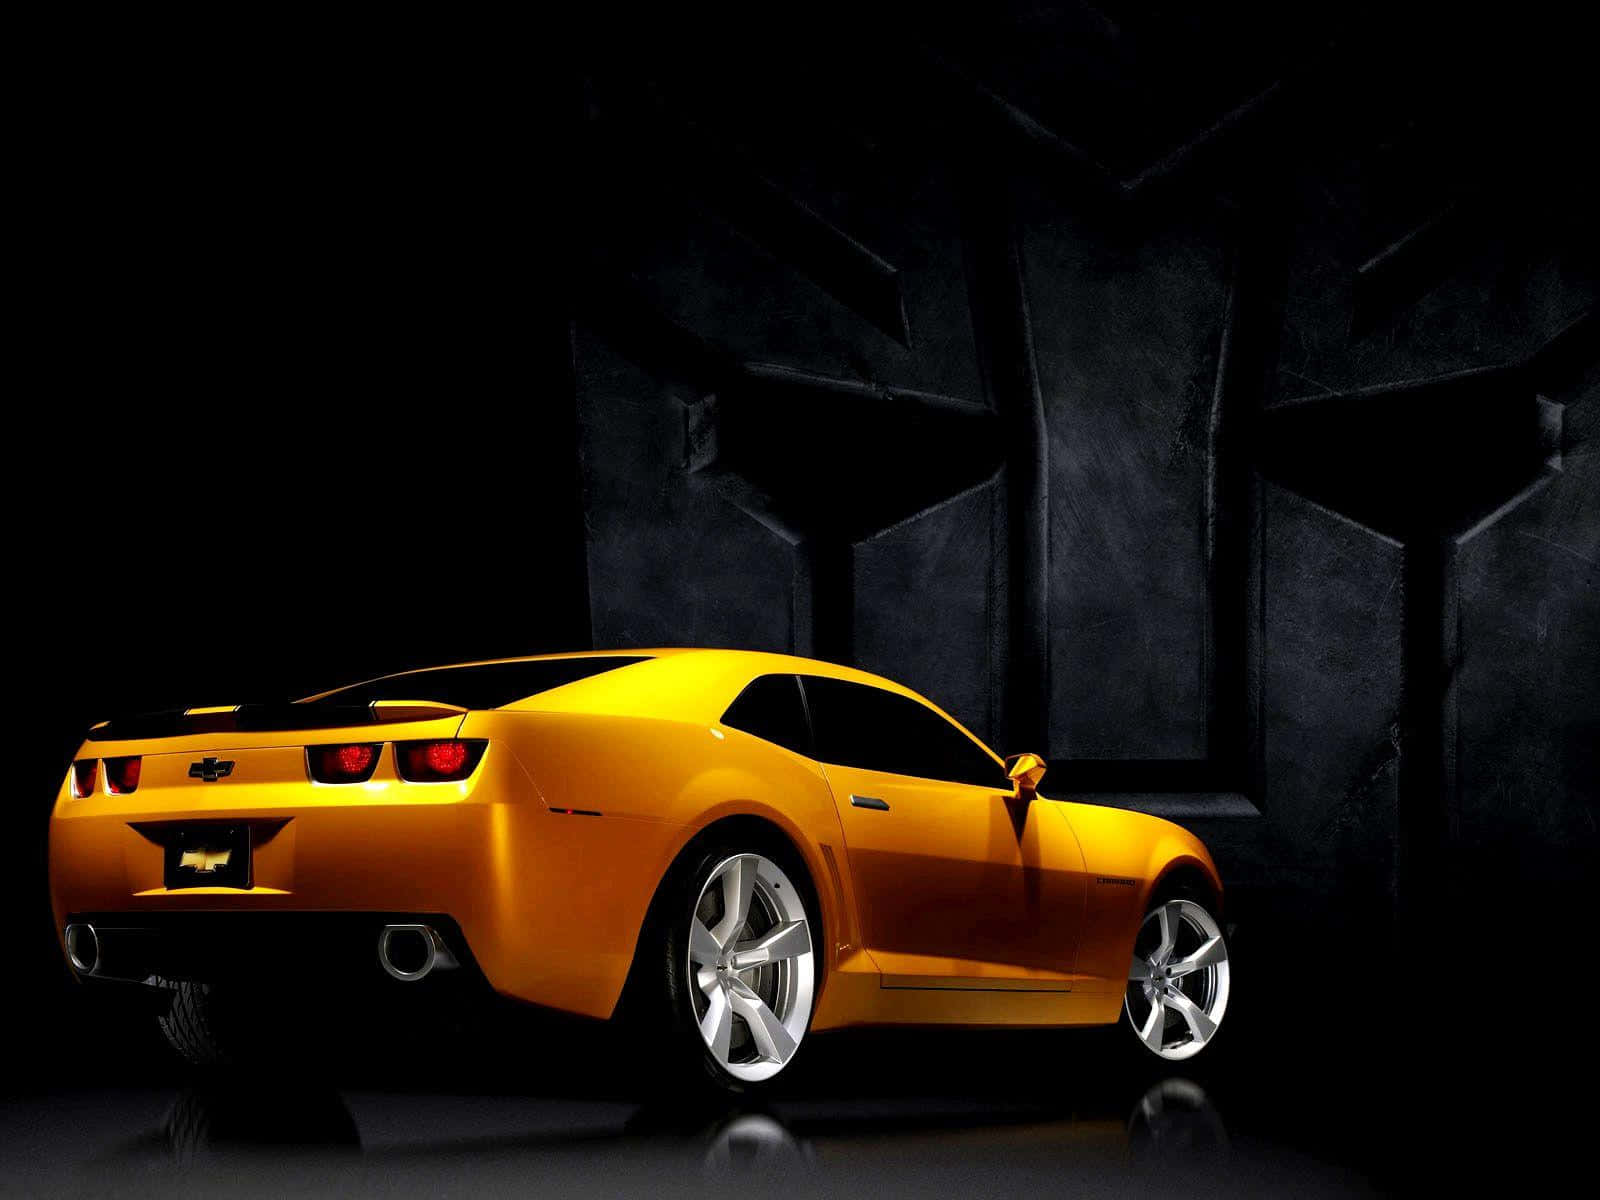 Bumblebee, The Heroic Autobot In Transformers